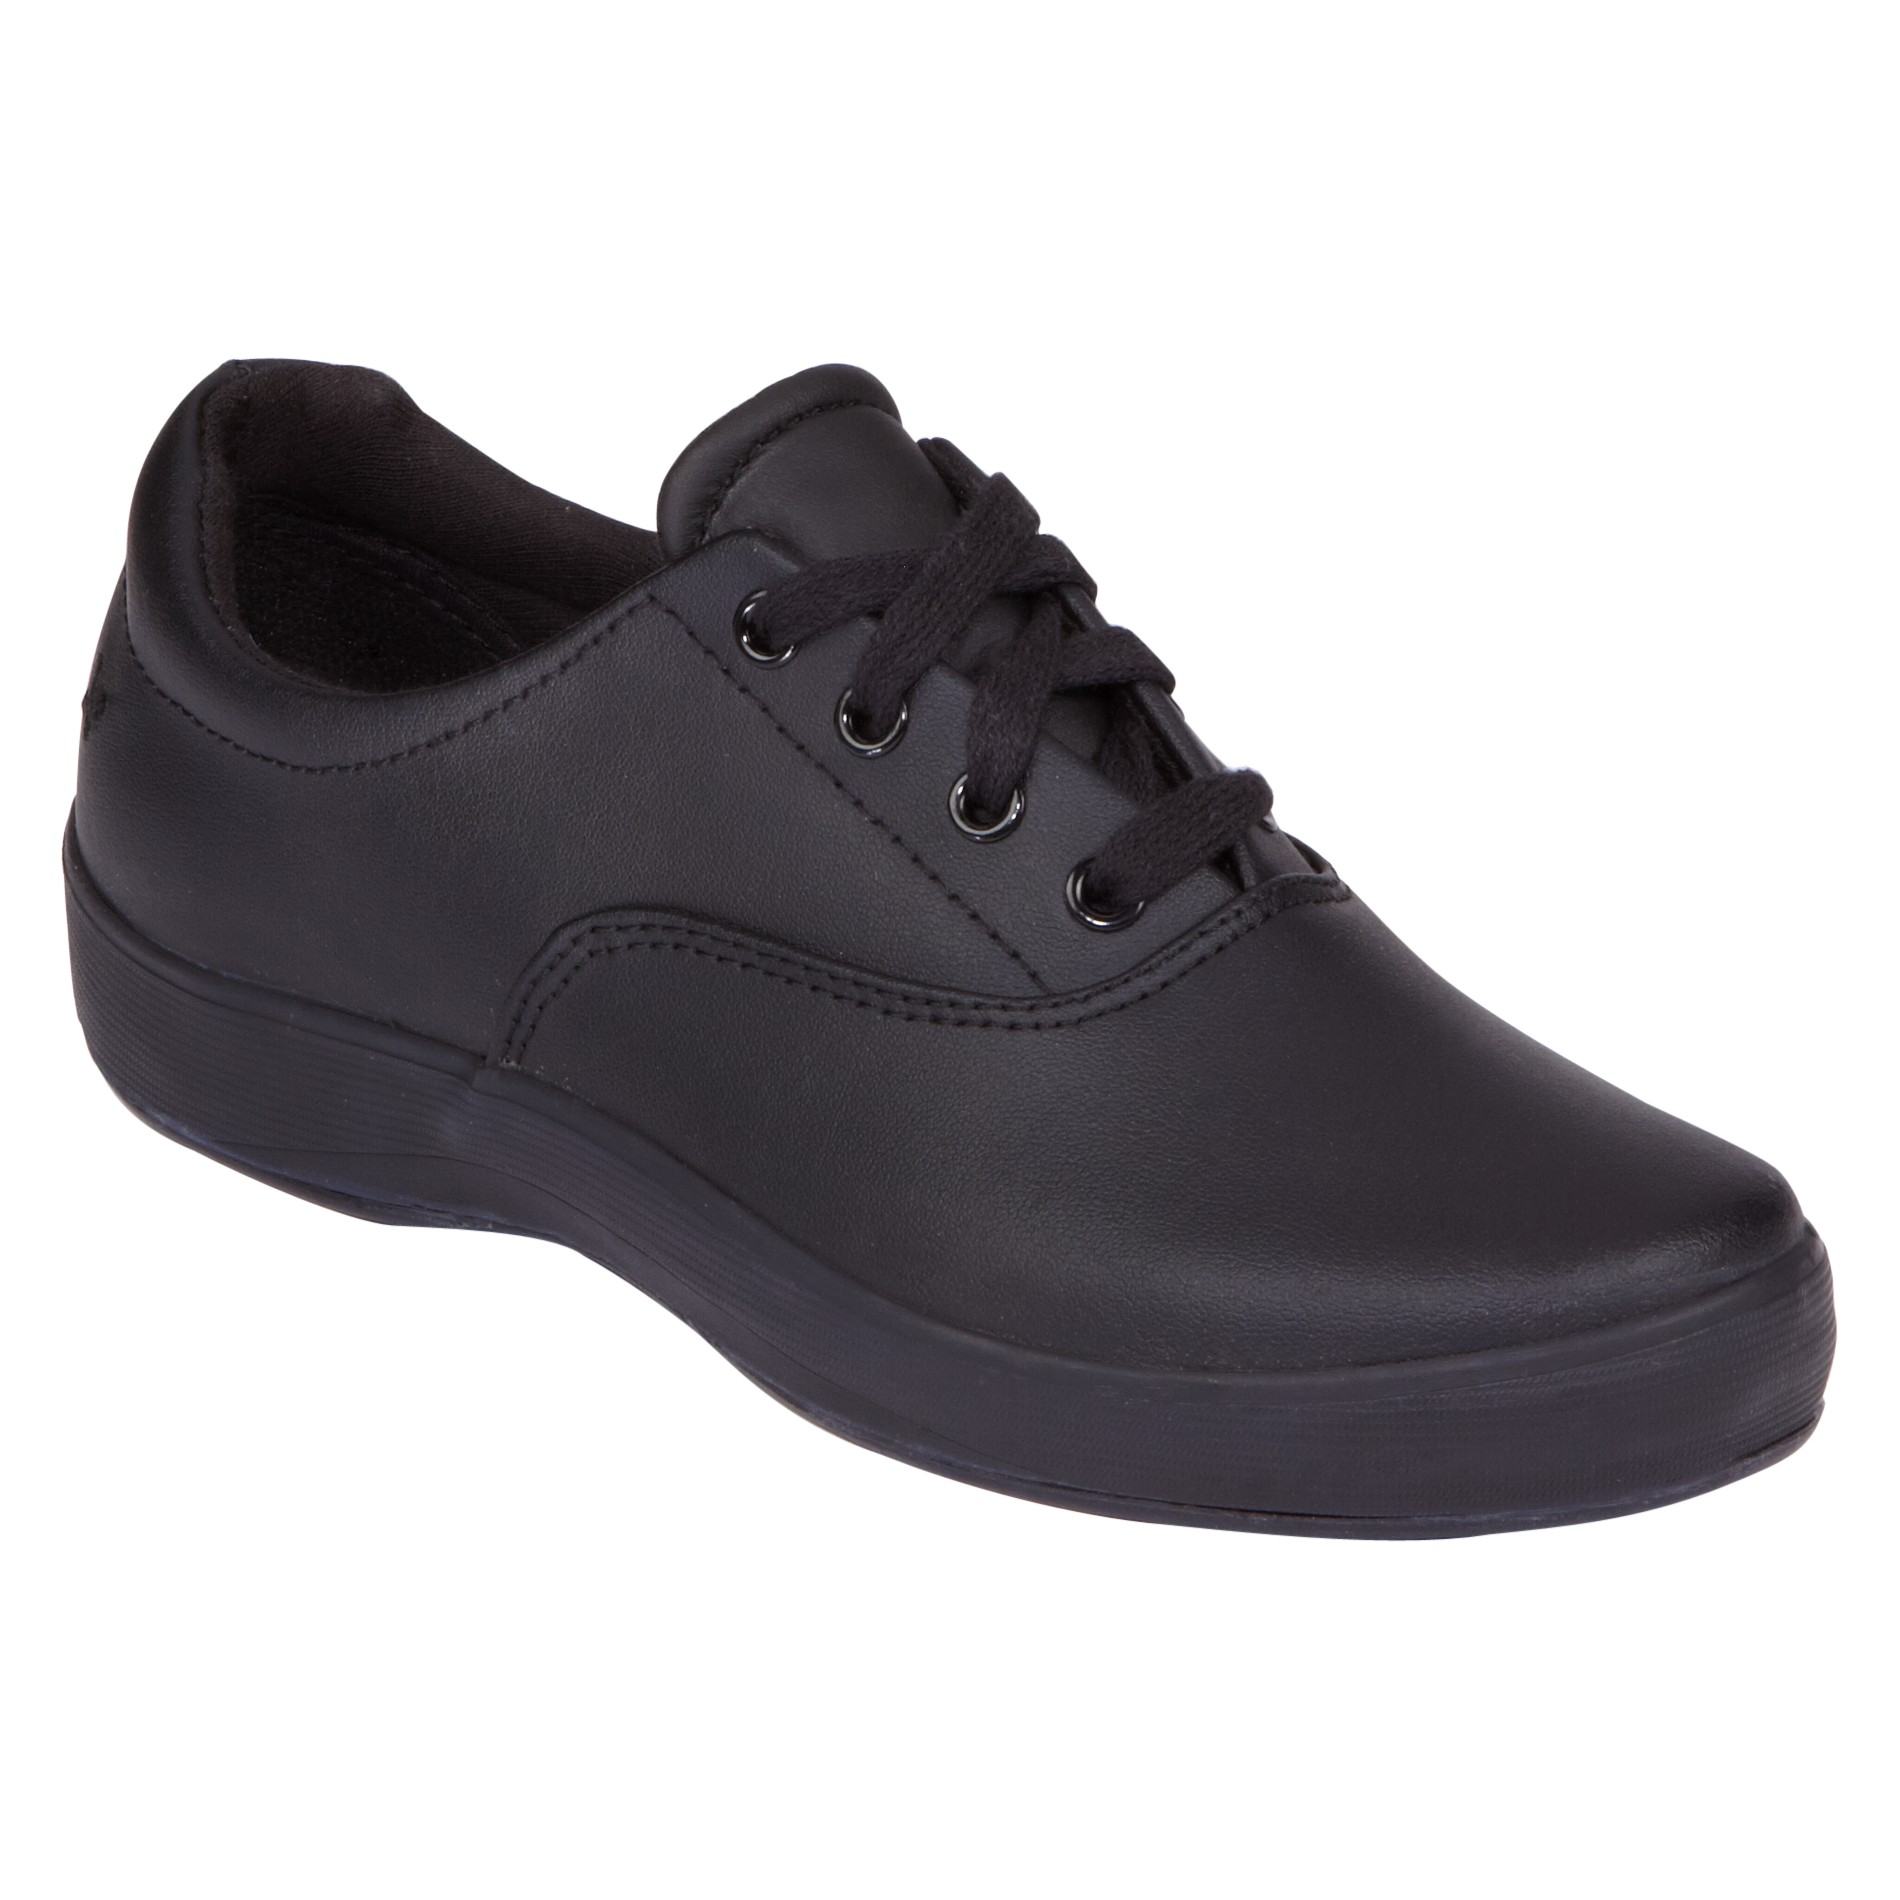 Grasshoppers Women's Casual Leather Janey Wide Avail - Black